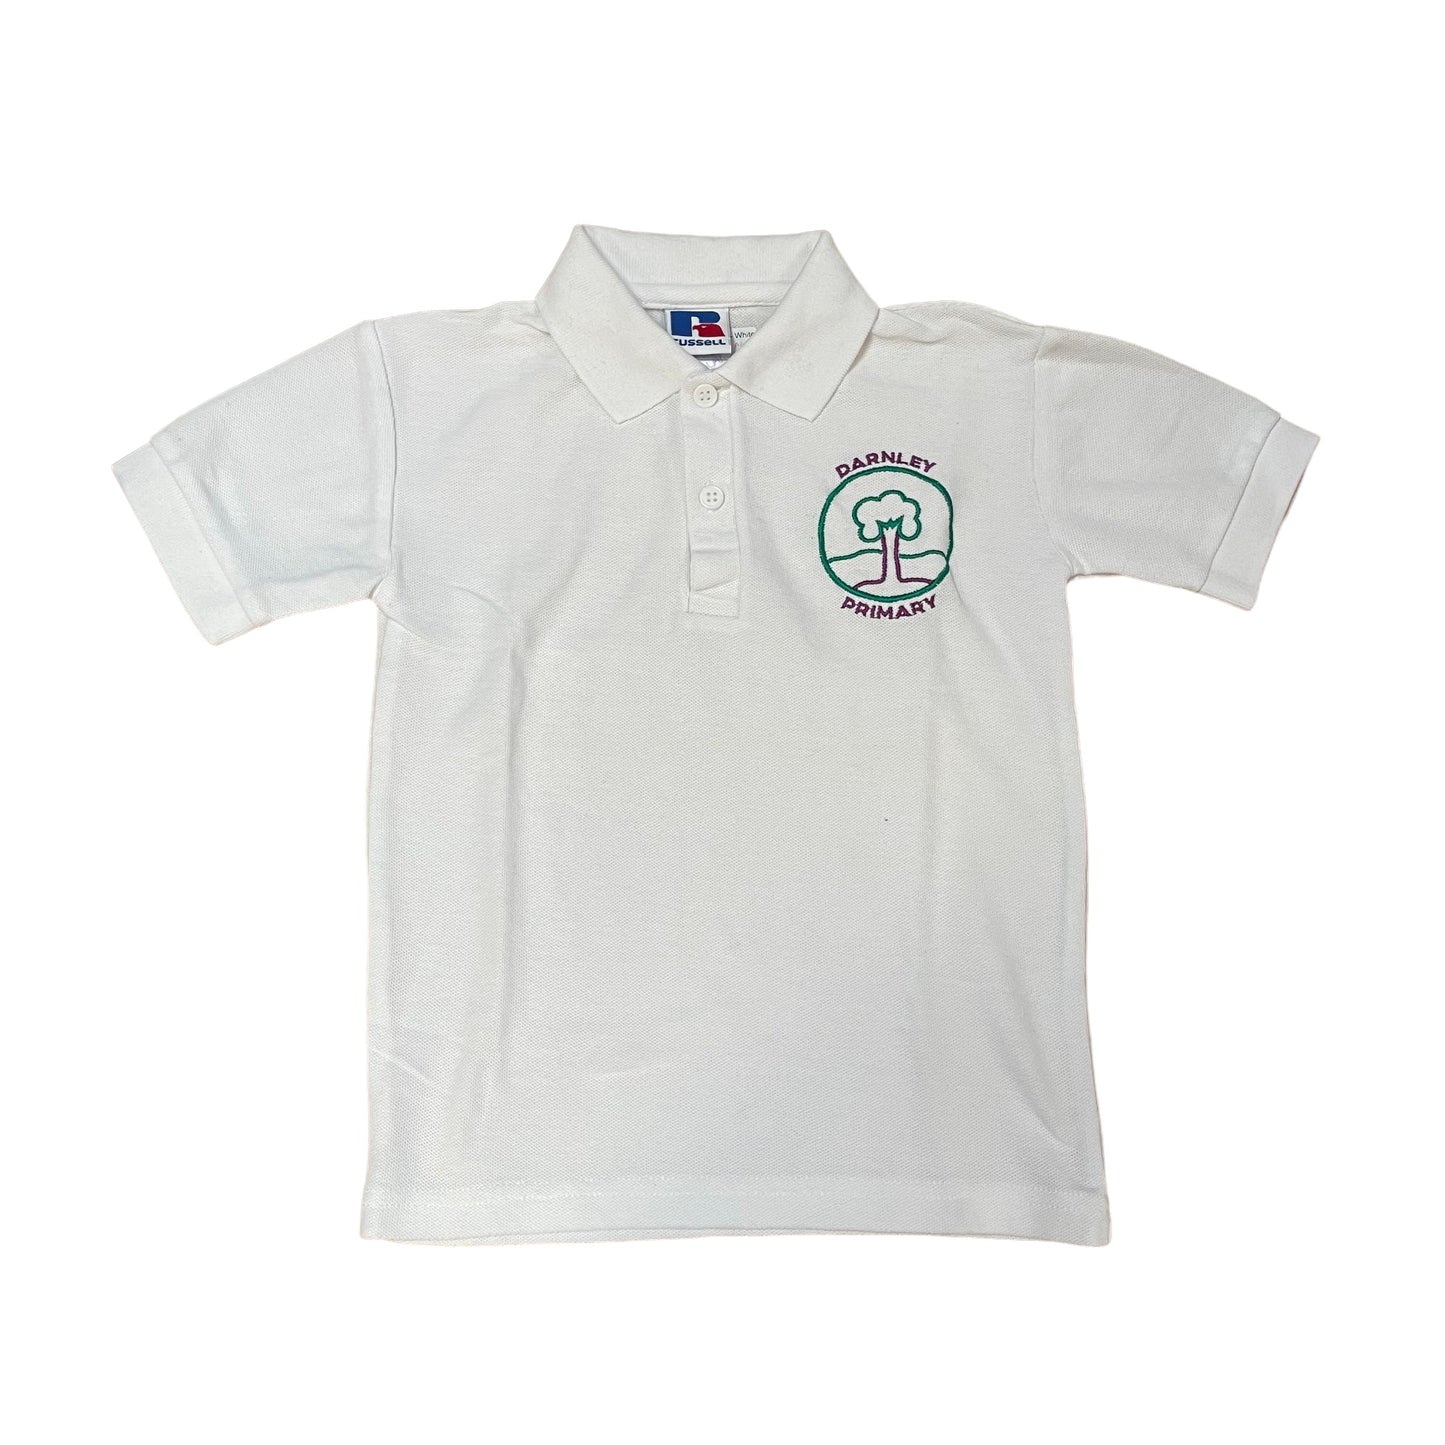 Darnley Primary White Polo Shirt